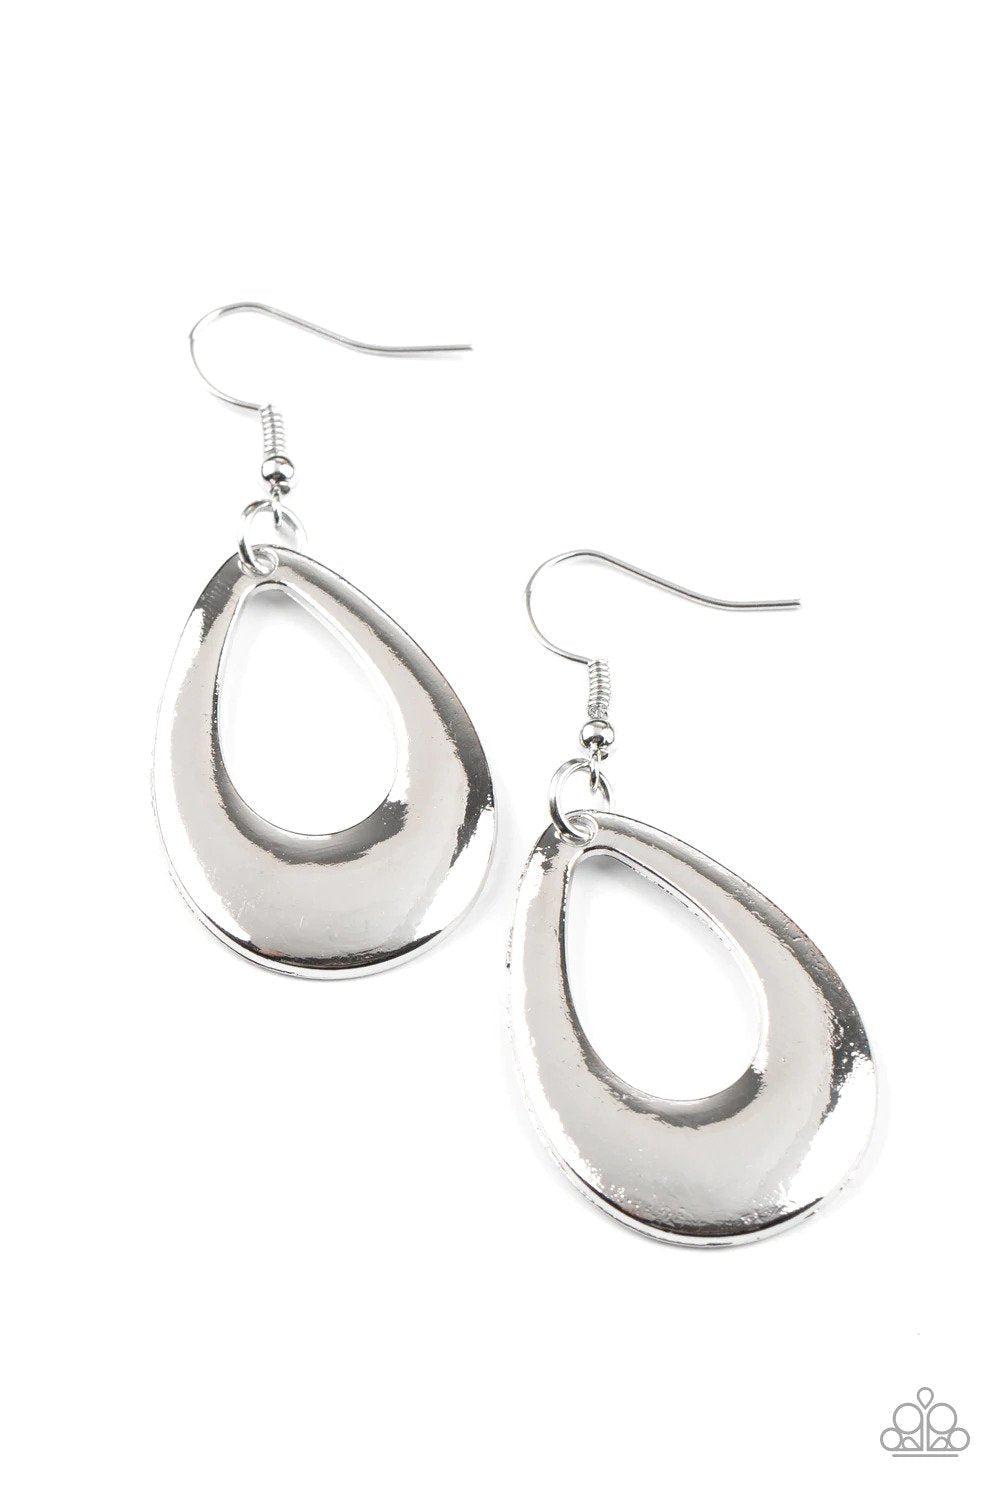 All Allure, All The Time Silver Earrings - Paparazzi Accessories- lightbox - CarasShop.com - $5 Jewelry by Cara Jewels